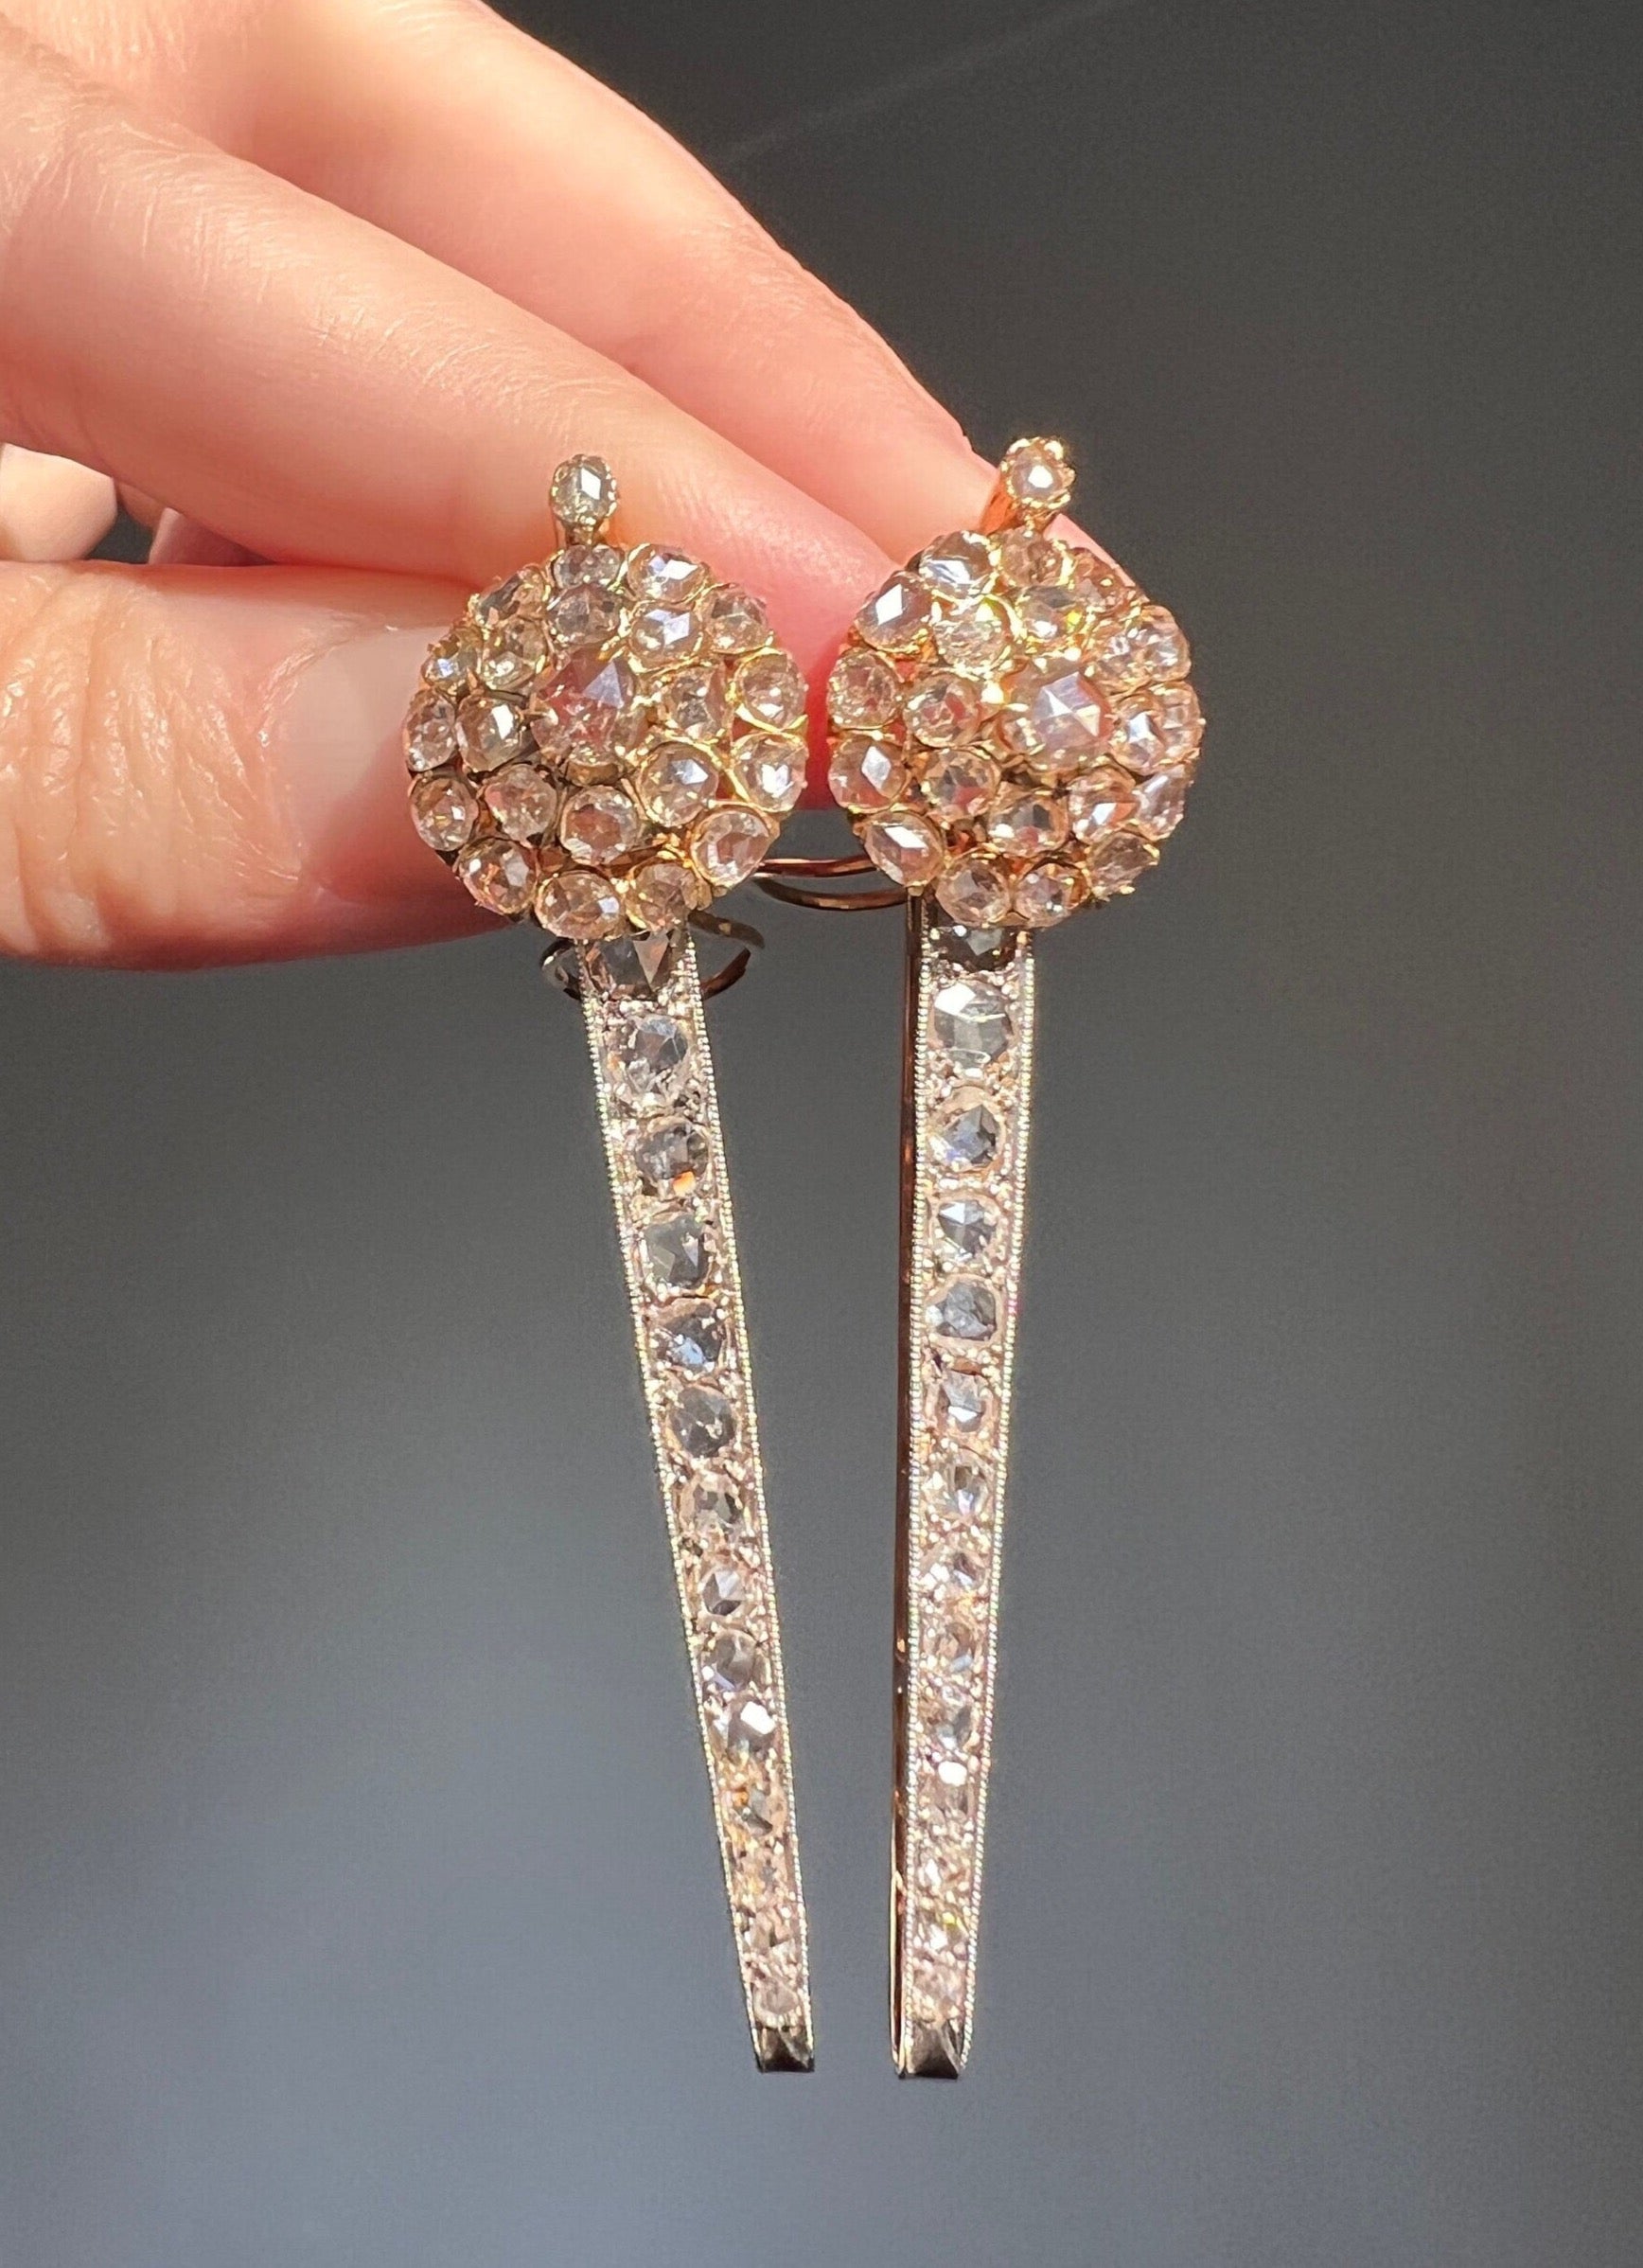 SPIKE French Antique 4 Carats 74 Rose DIAMOND Cluster Dangle Earrings 18k Gold 2.4" LONG Drop Bridal Something Old Rare Romantic Gift 4Ctw